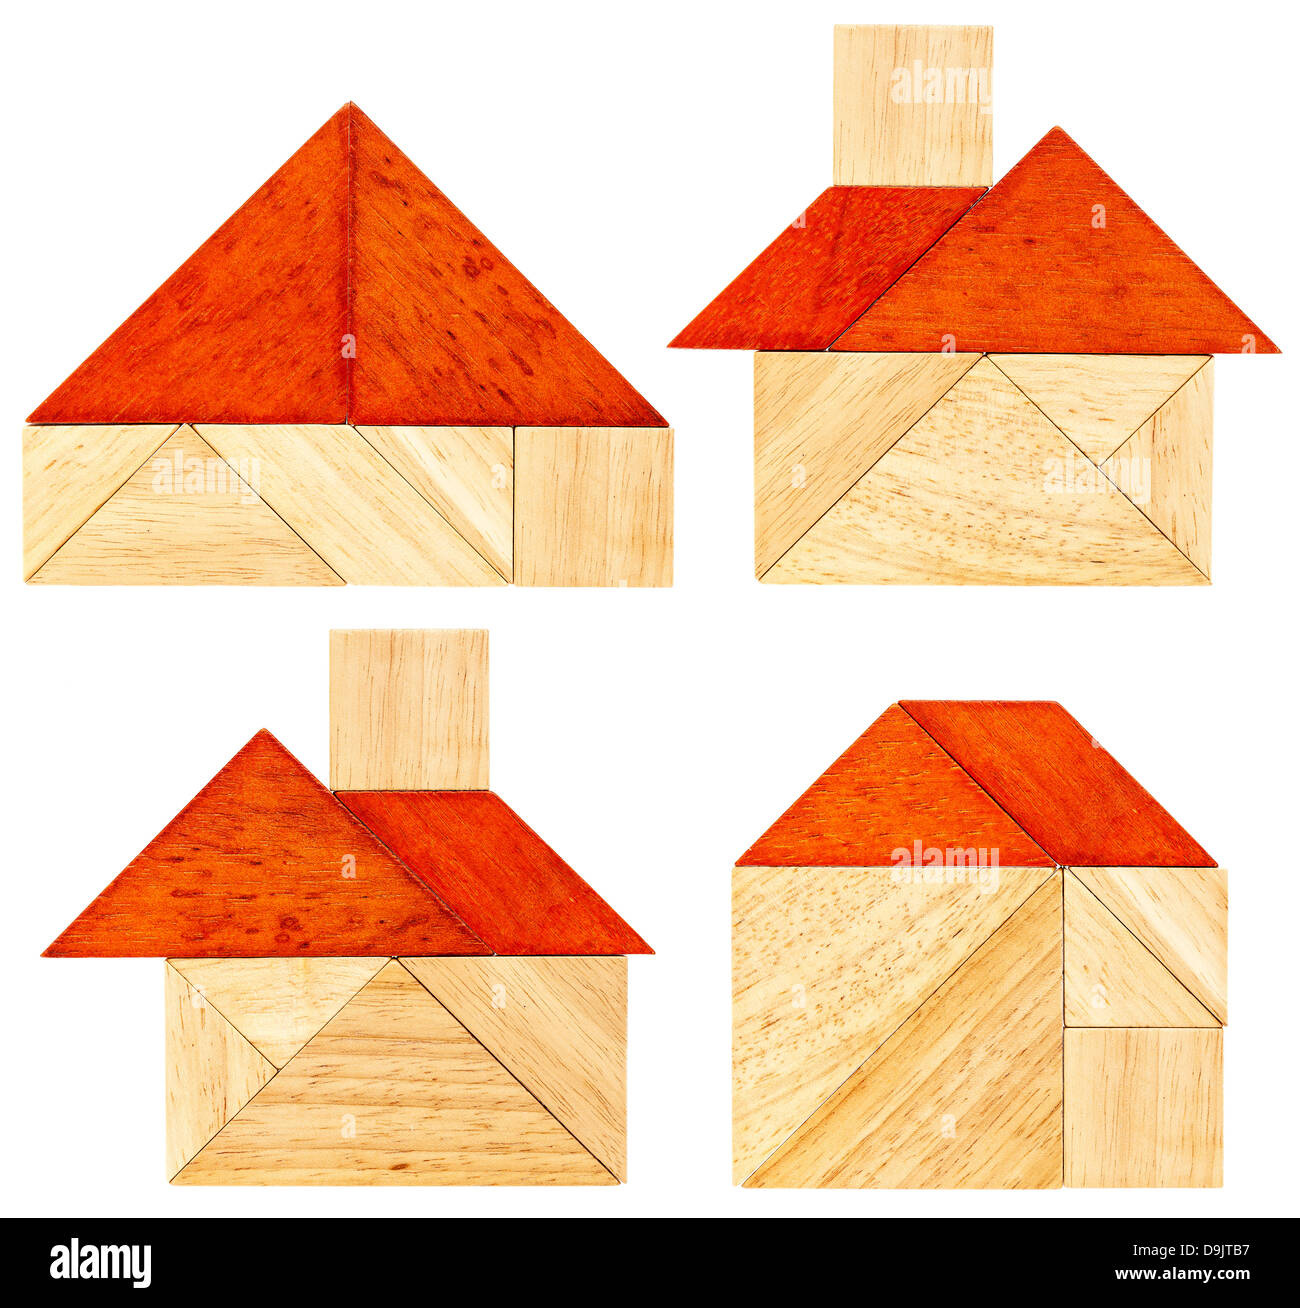 four abstract pictures of a house with a red roof built from seven tangram wooden pieces, a traditional Chinese puzzle game Stock Photo